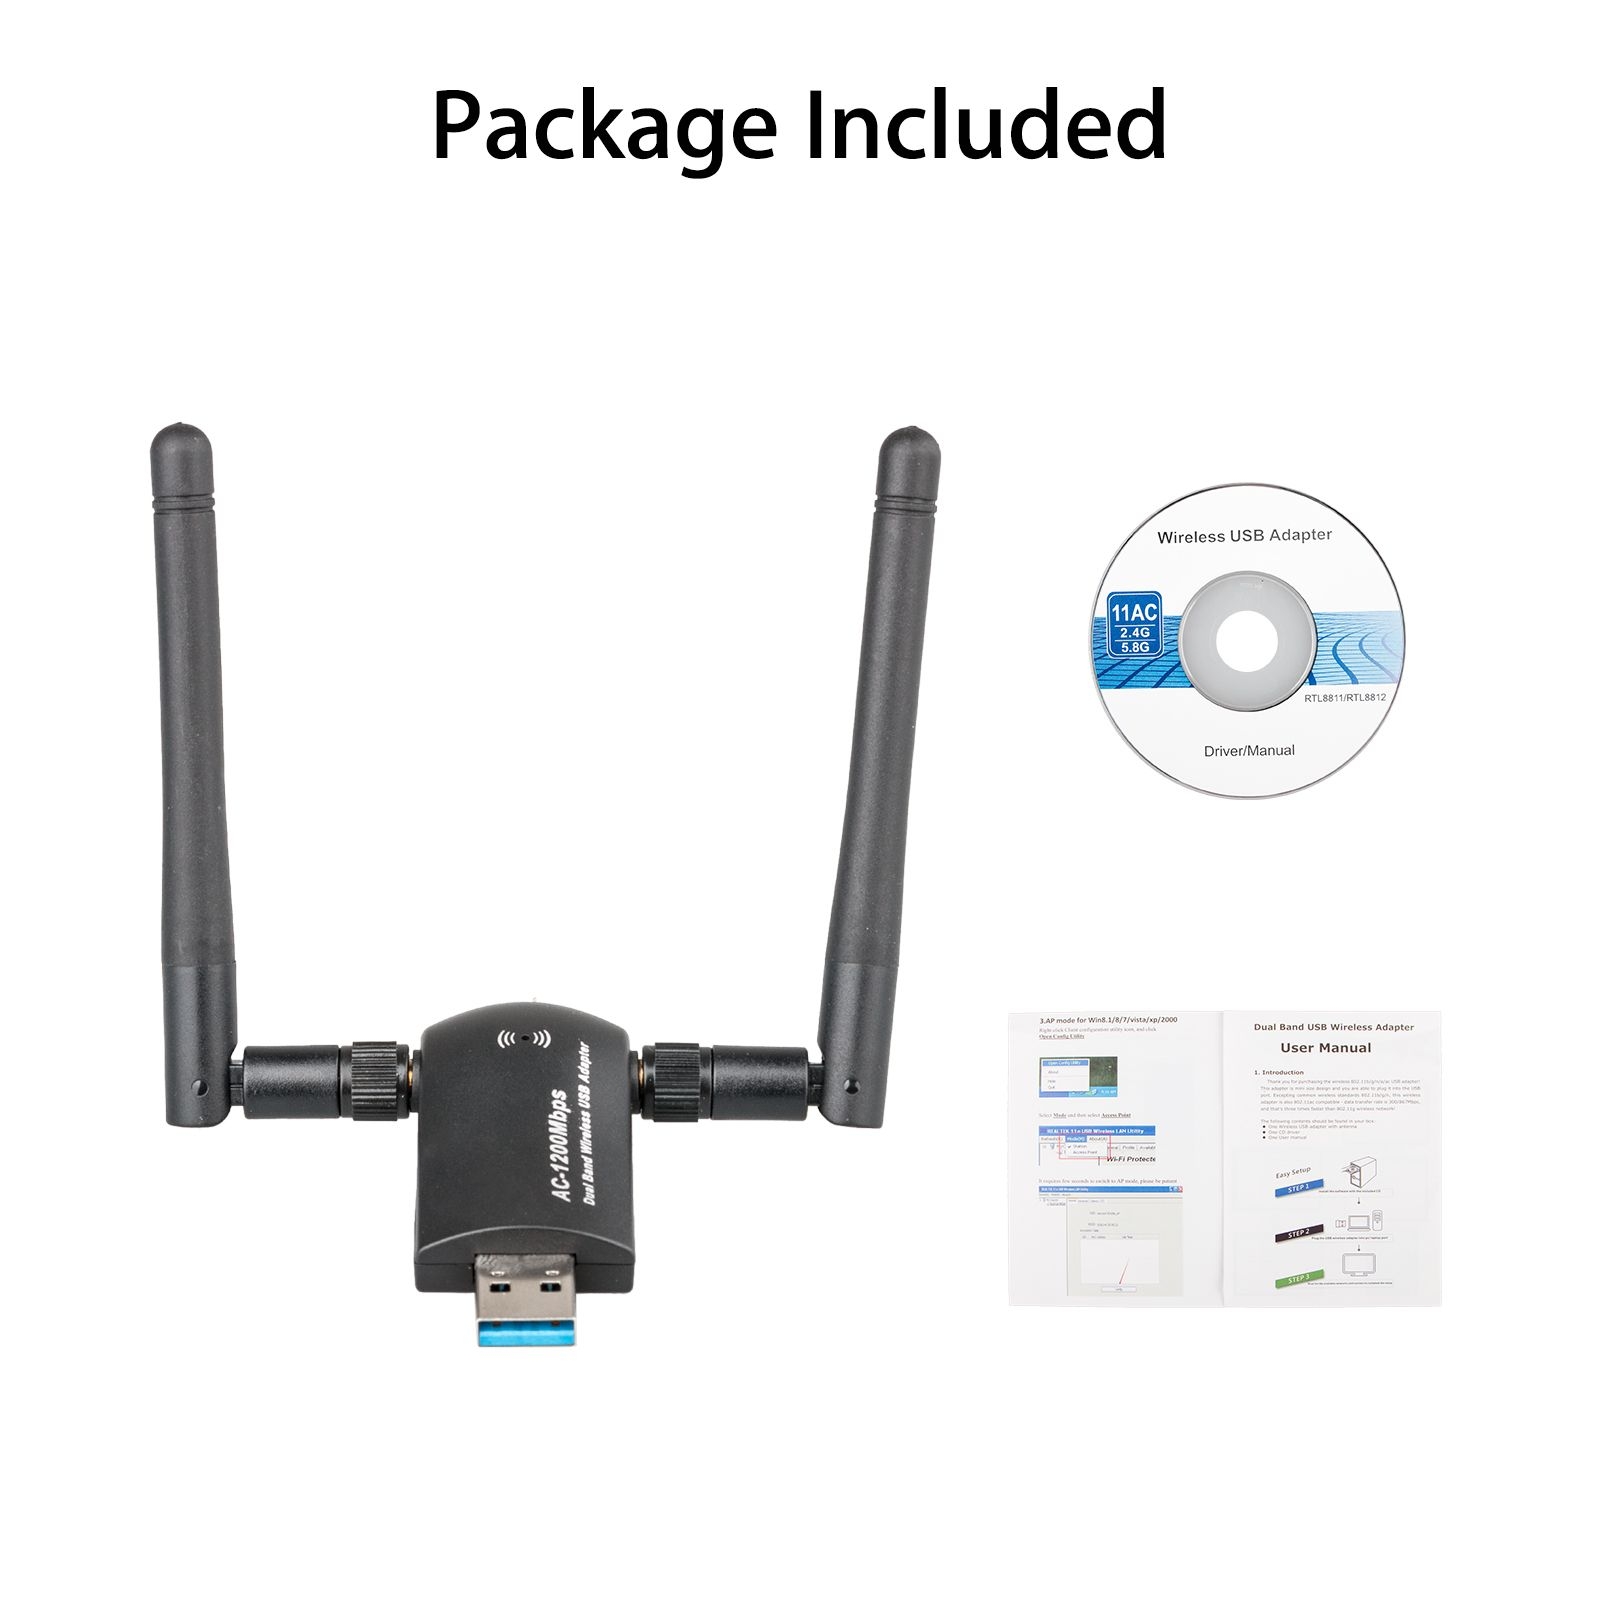 Tsv Dual Band 1200Mbps 2.4/5Ghz Wireless Usb Wifi Network Adapter 2X5Dbi  Antenna 802.11Ac Compatibility With Windows Vista/ 7/ 8/ 8.1/10/ Linux/ Mac.